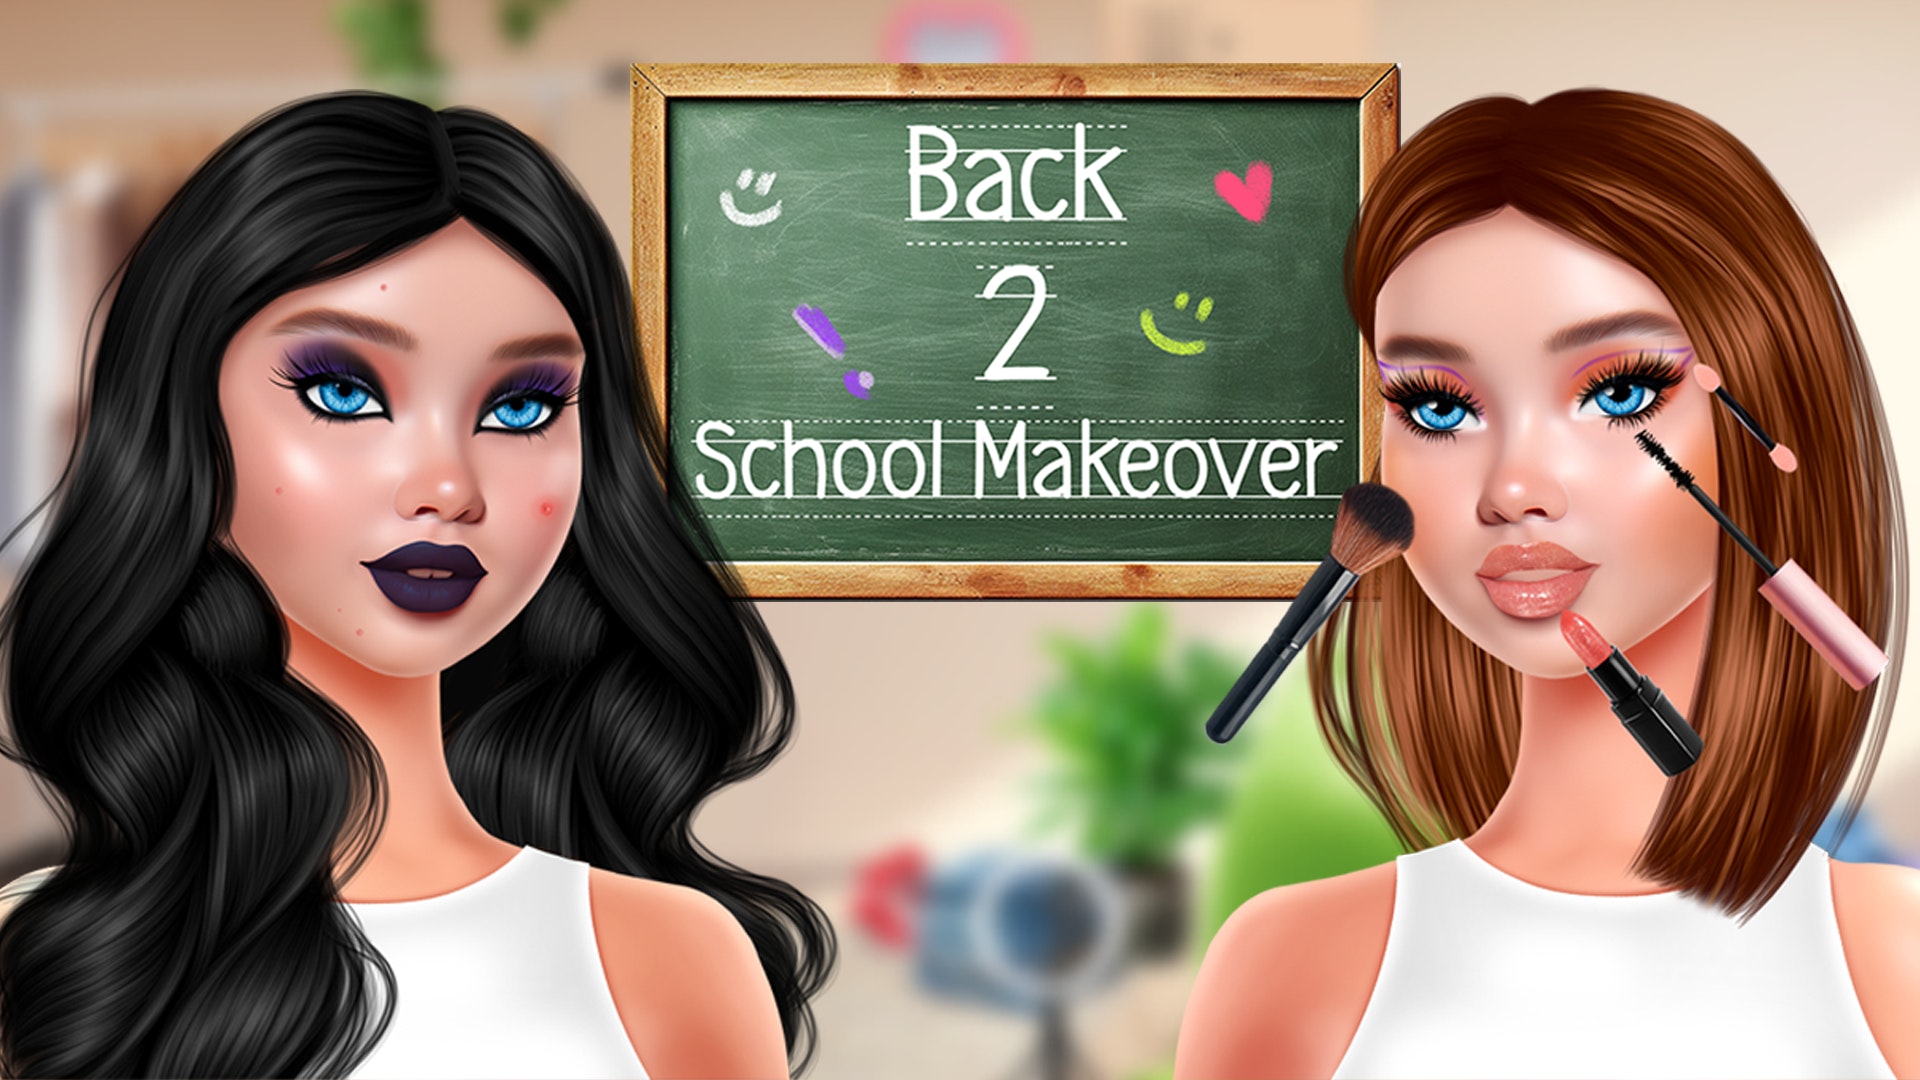 Girl Dress Up & Makeover: Play Online For Free On Playhop